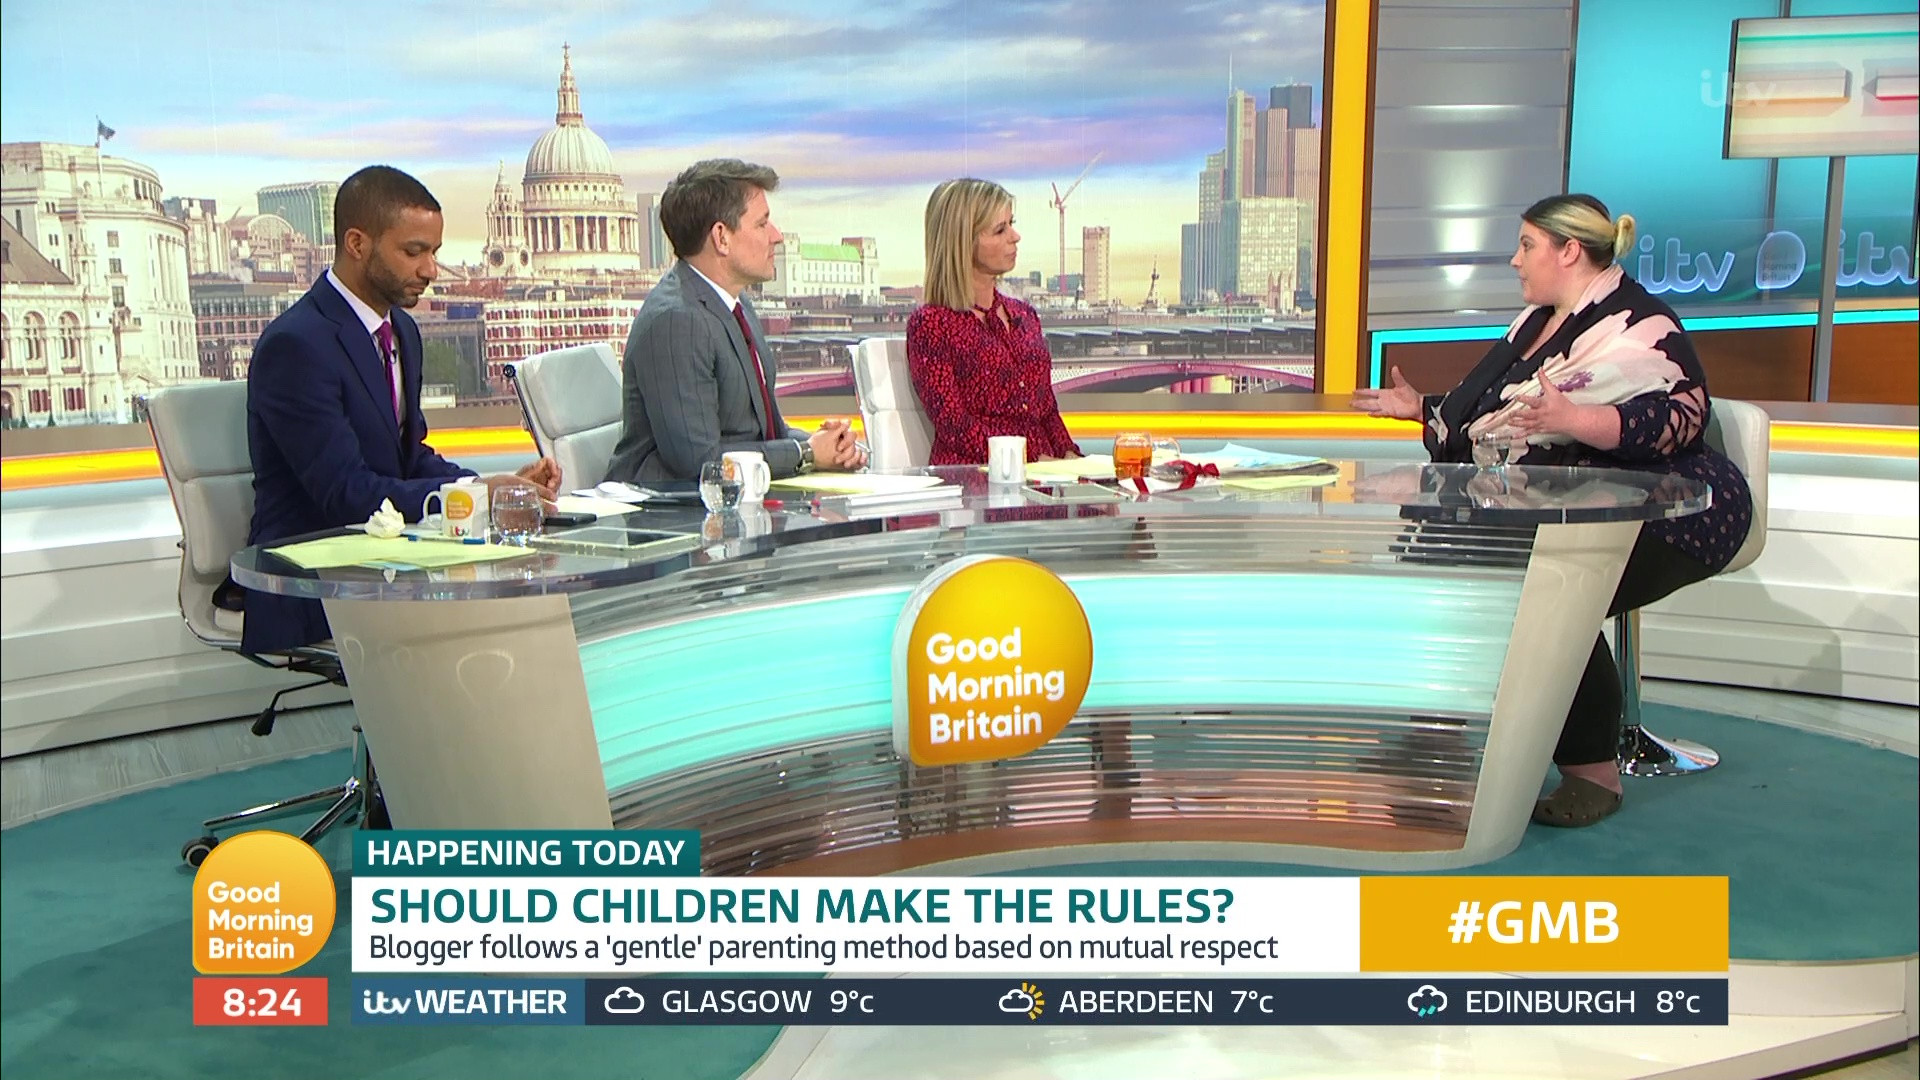  Nic told hosts Kate Garraway and Ben Shephard that George learned to read and write by pointing at signs